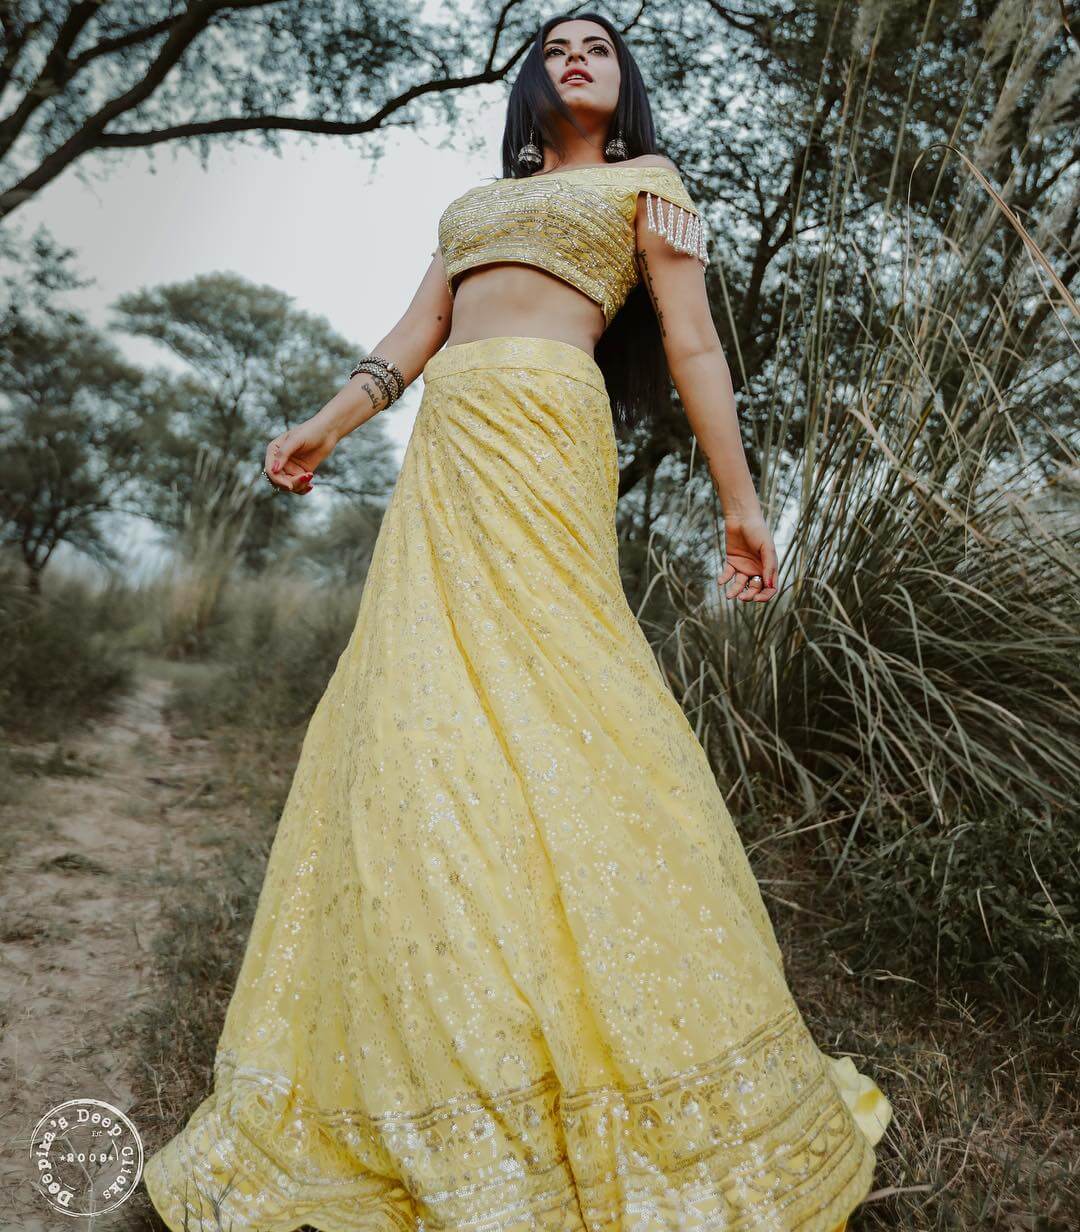 Simi Chahal In Yellow Lehenga Outfit Simi Chahal Outfit &amp; Looks Inspo